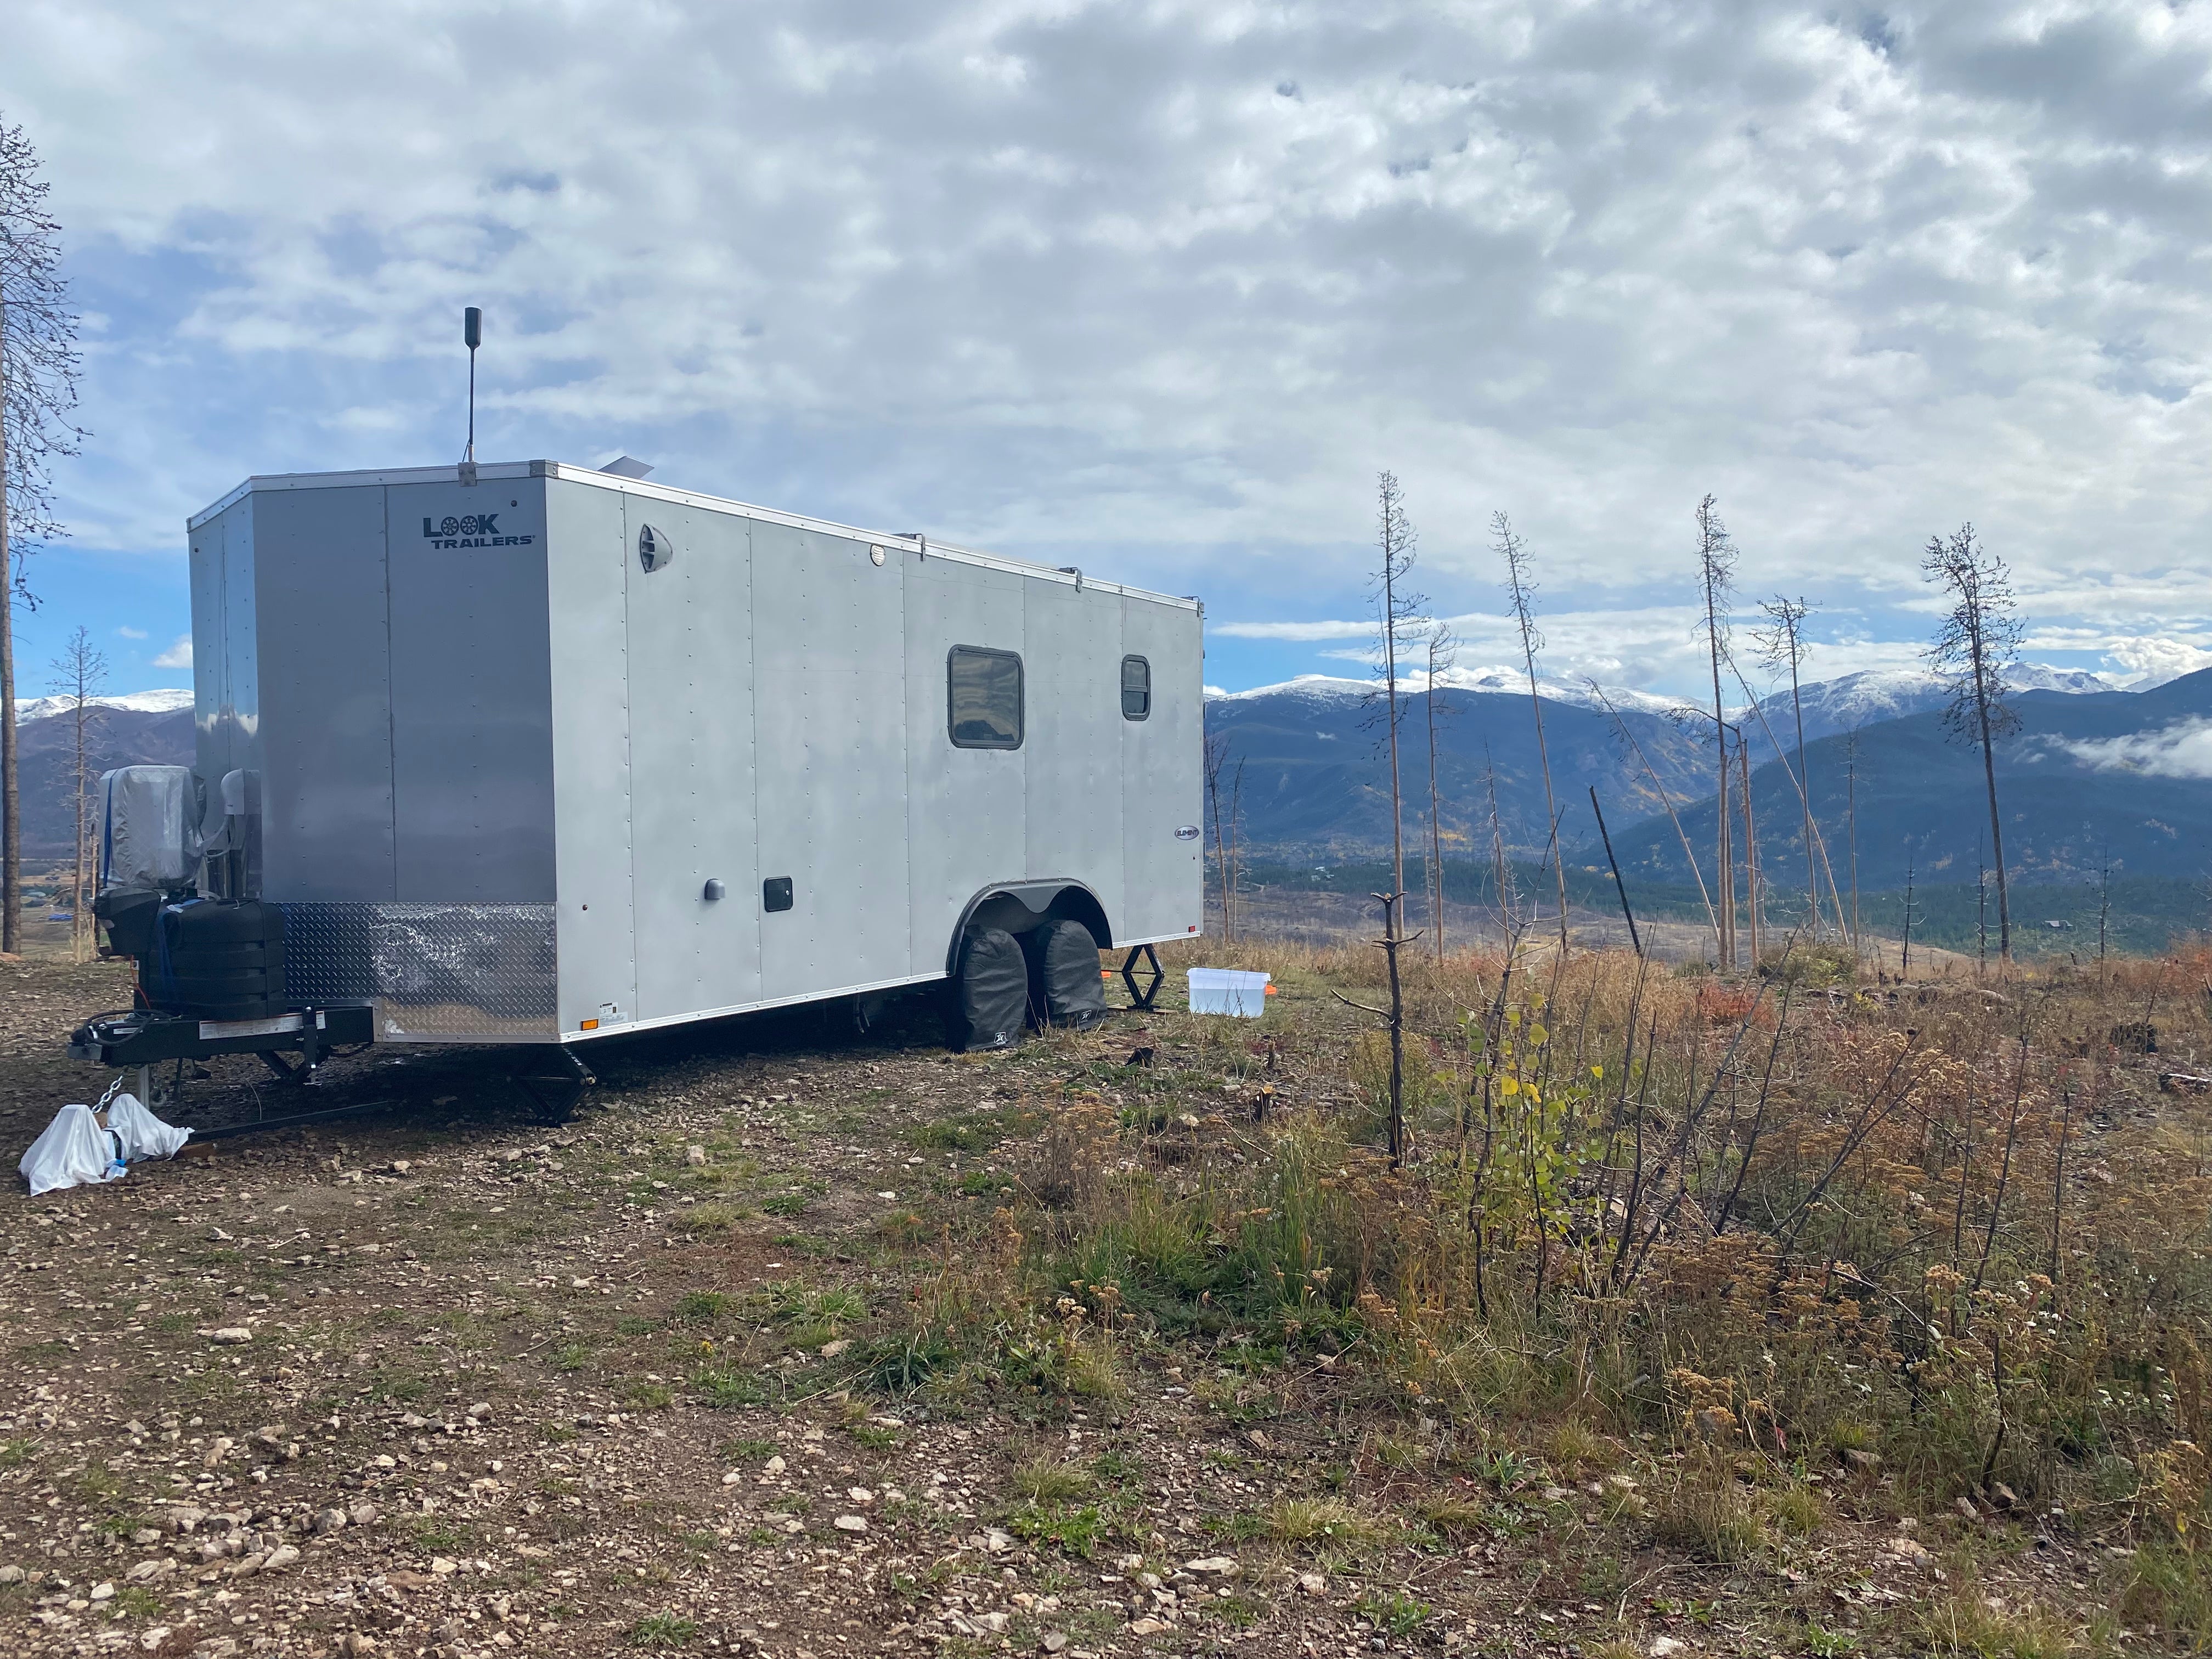 Camper submitted image from NFSR 120 Dispersed Site - Arapaho National Forest - 2